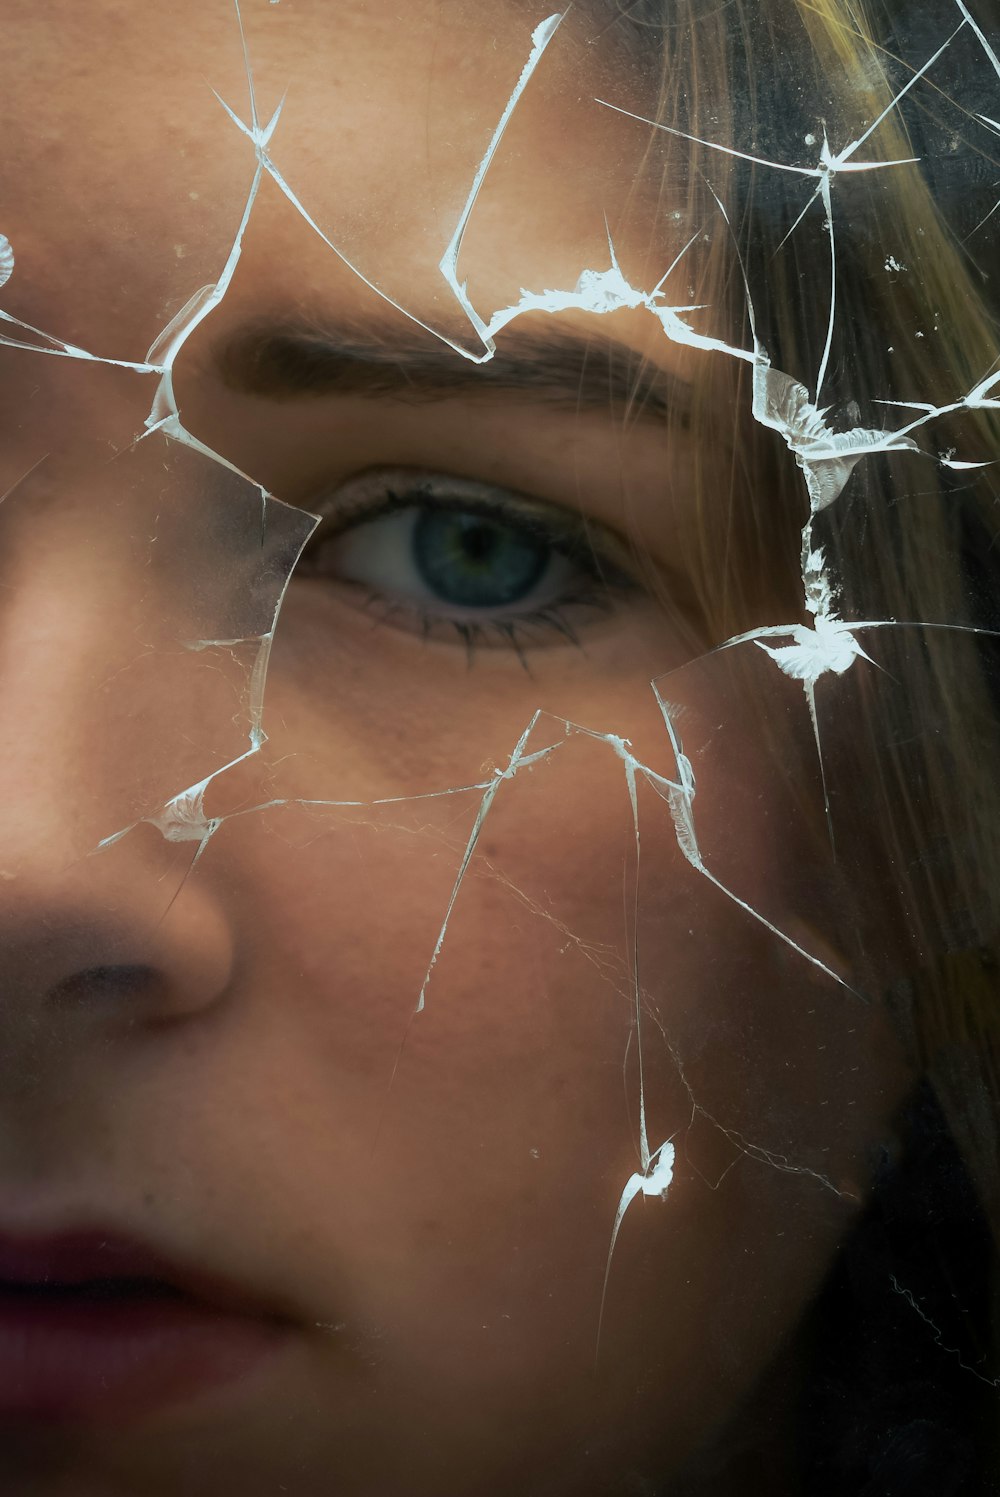 a close up of a person's face with broken glass